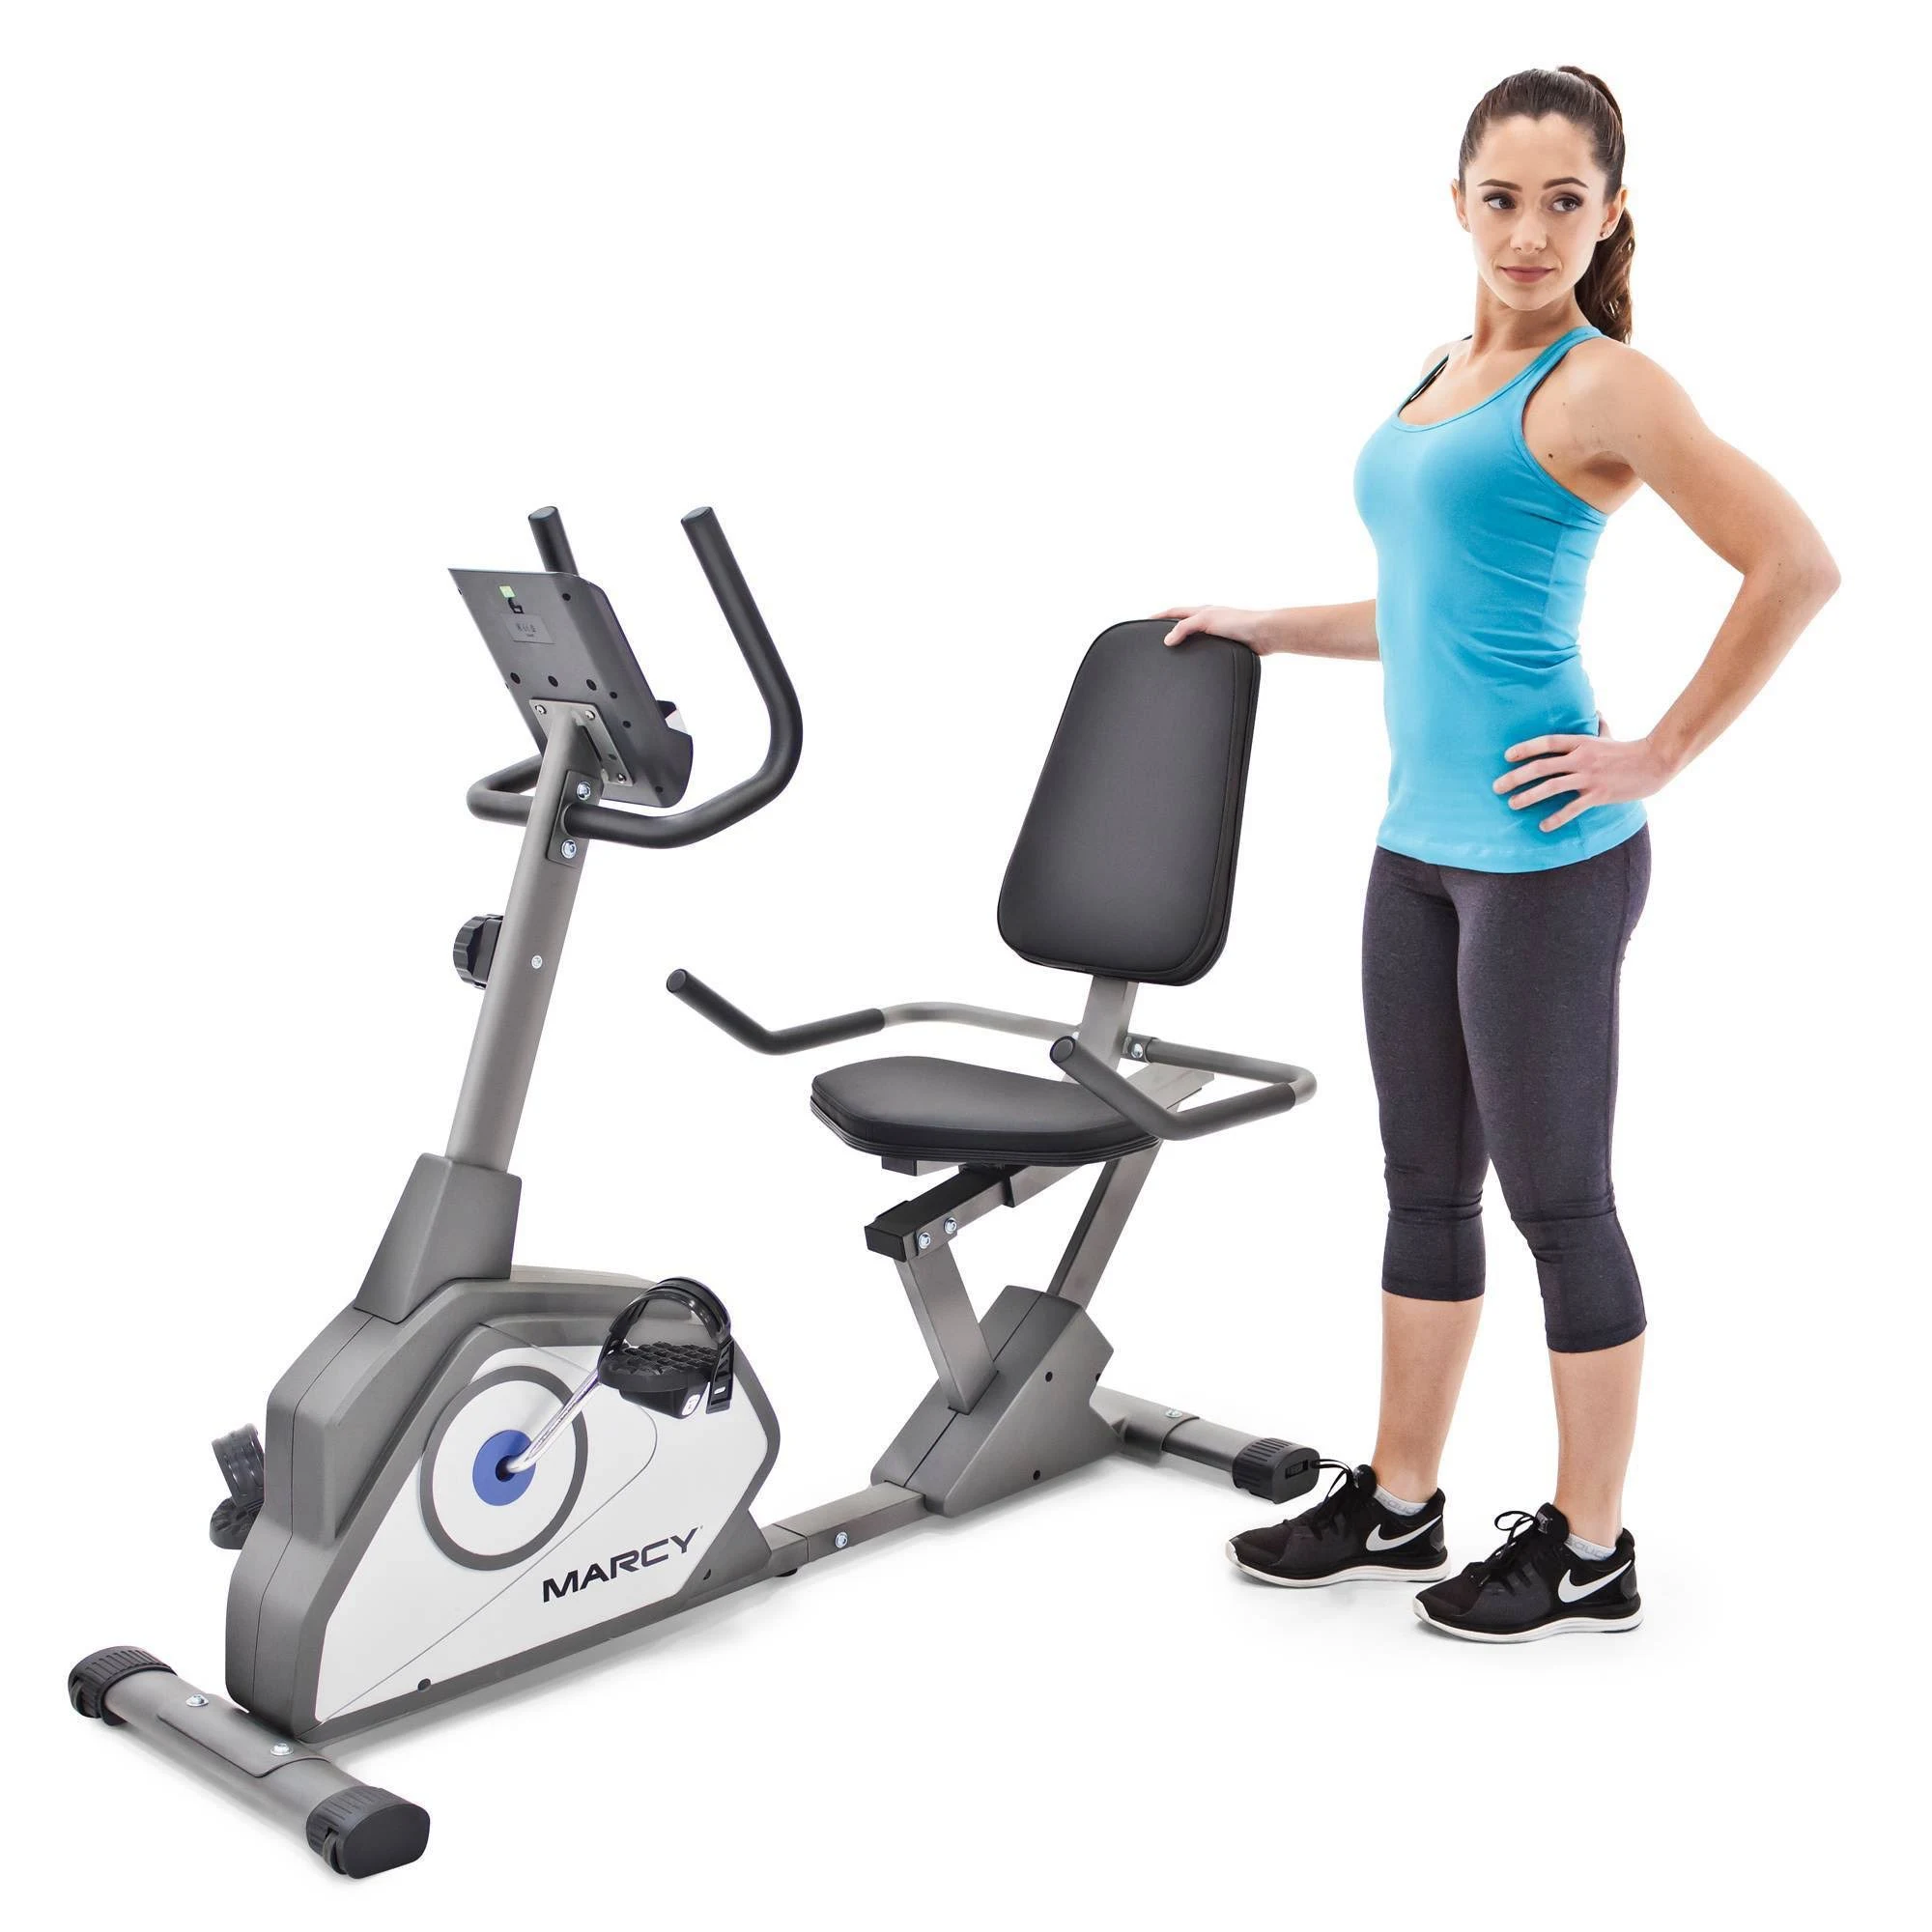 Marcy Magnetic Recumbent Exercise Bike (NS-40502R)